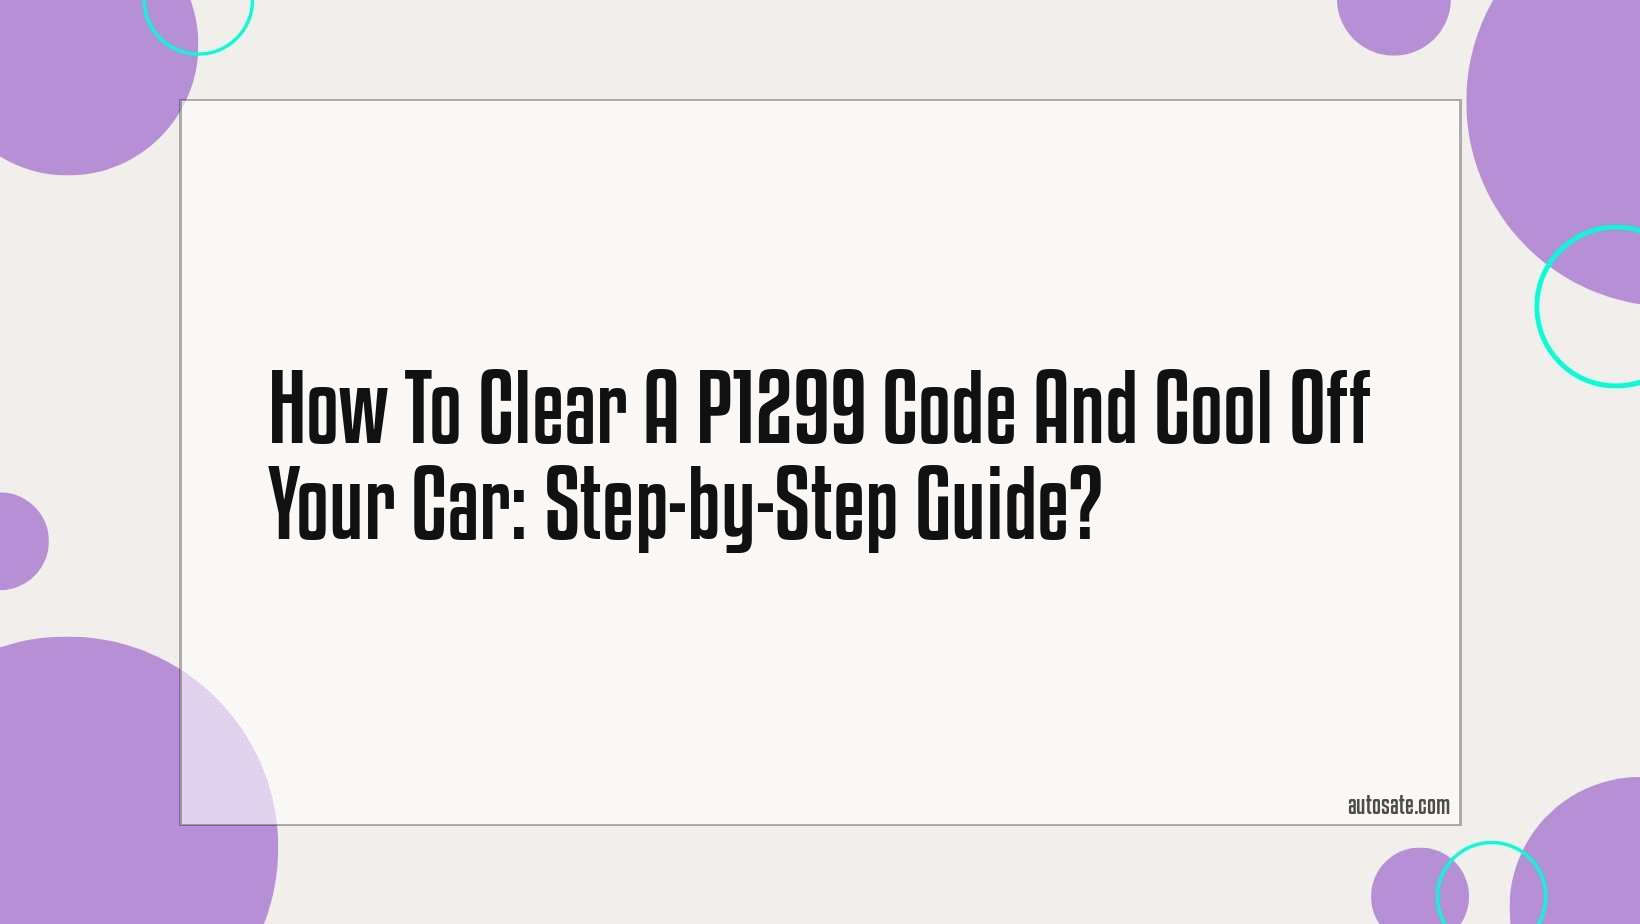 How To Clear A P1299 Code And Cool Off Your Car: Step-By-Step Guide